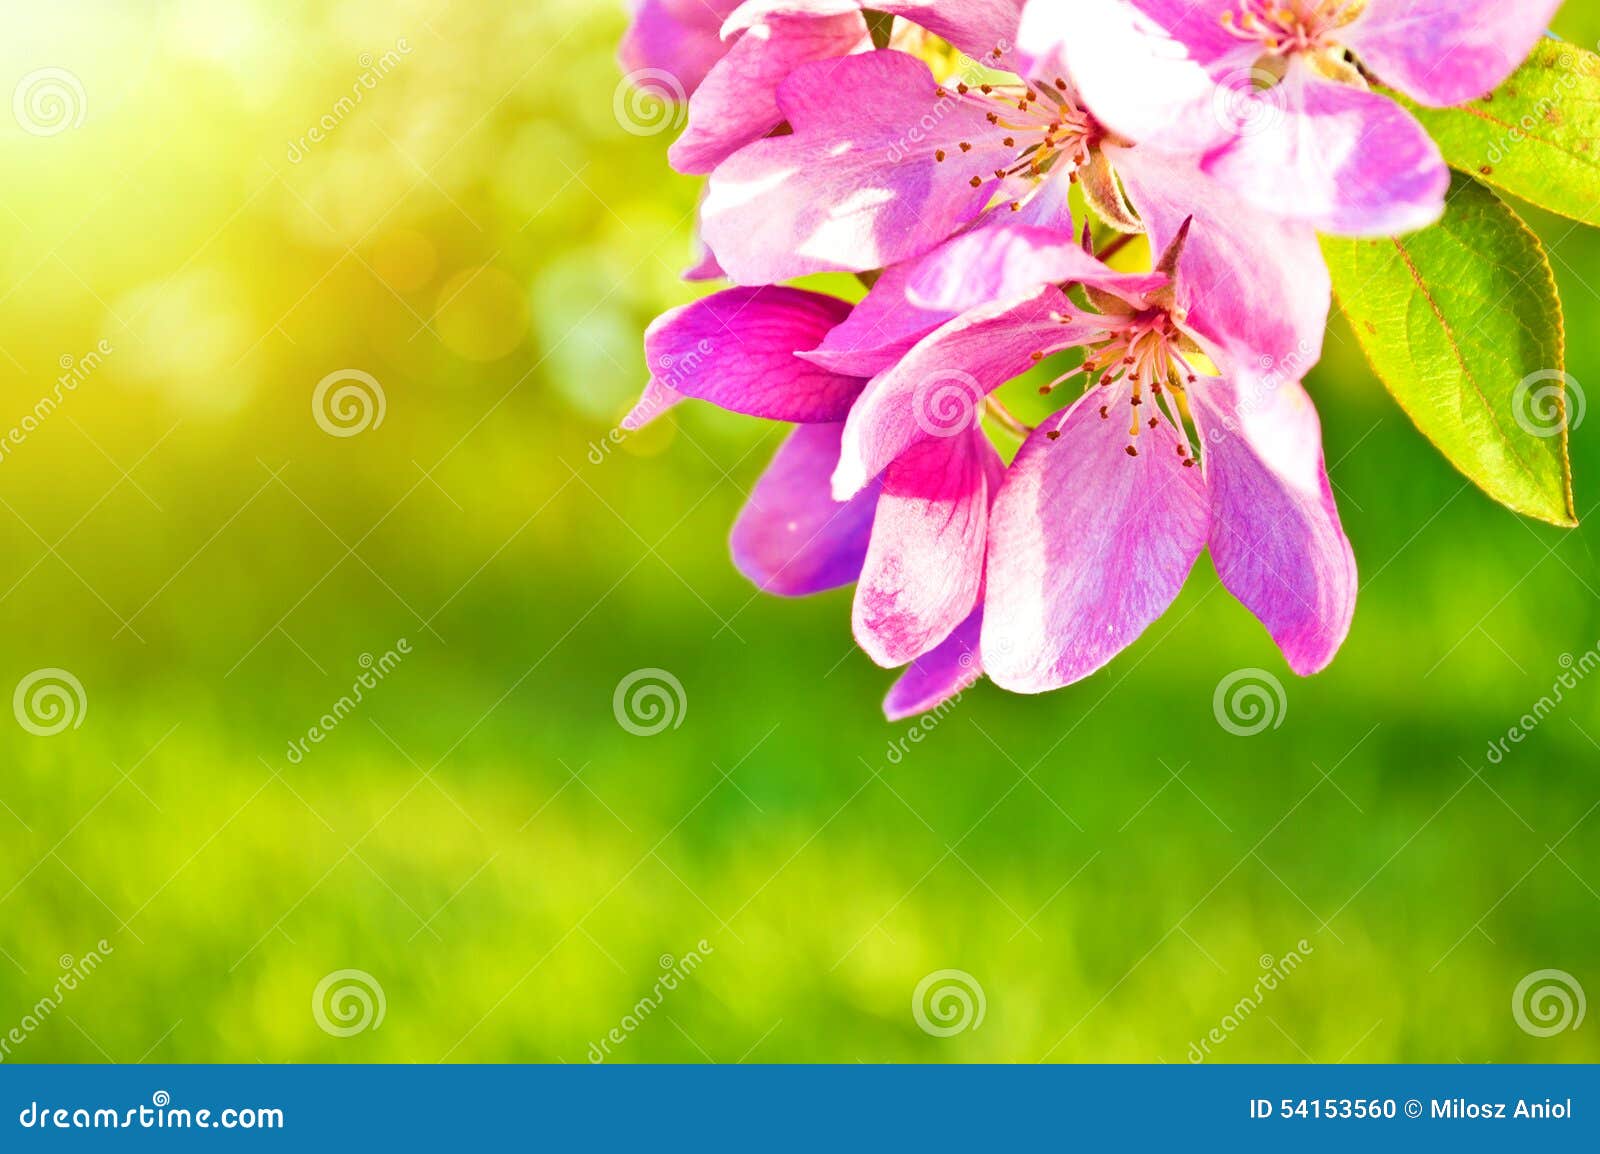 Nature And Spring Flower Background Stock Photo Image 54153560